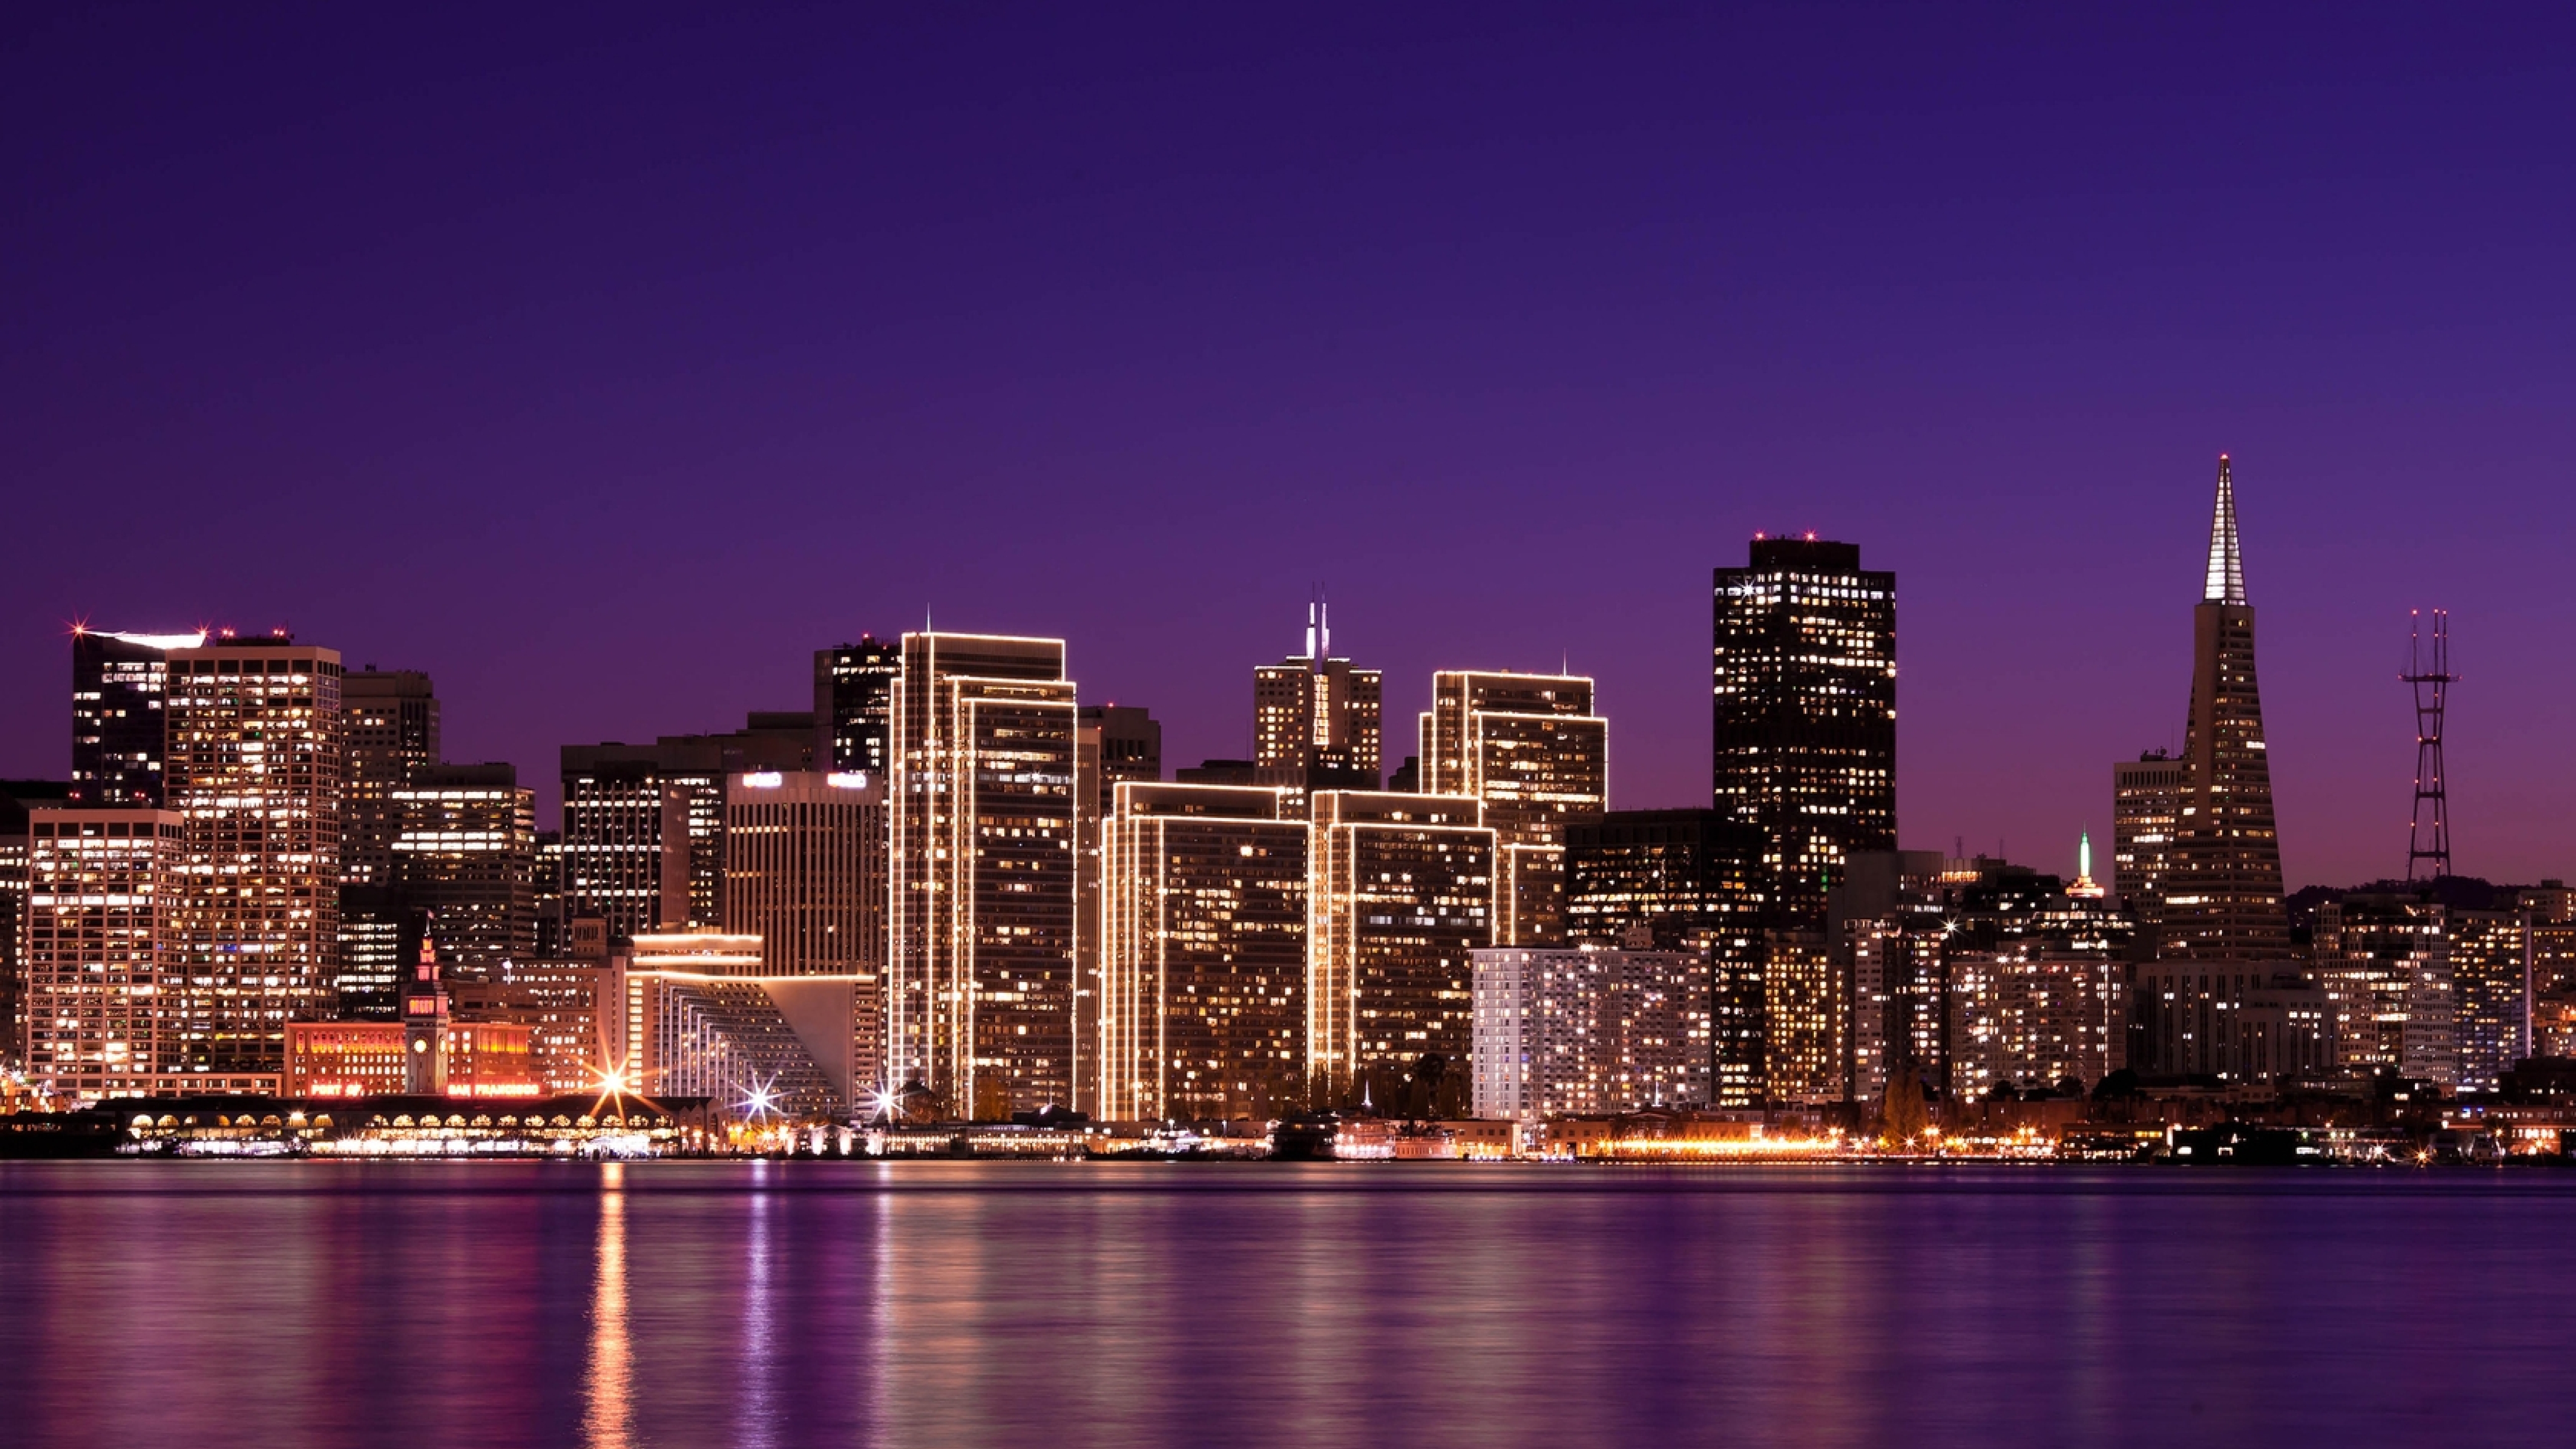 51x City San Francisco Lights 5k Wallpaper Hd City 4k Wallpapers Images Photos And Background Wallpapers Den